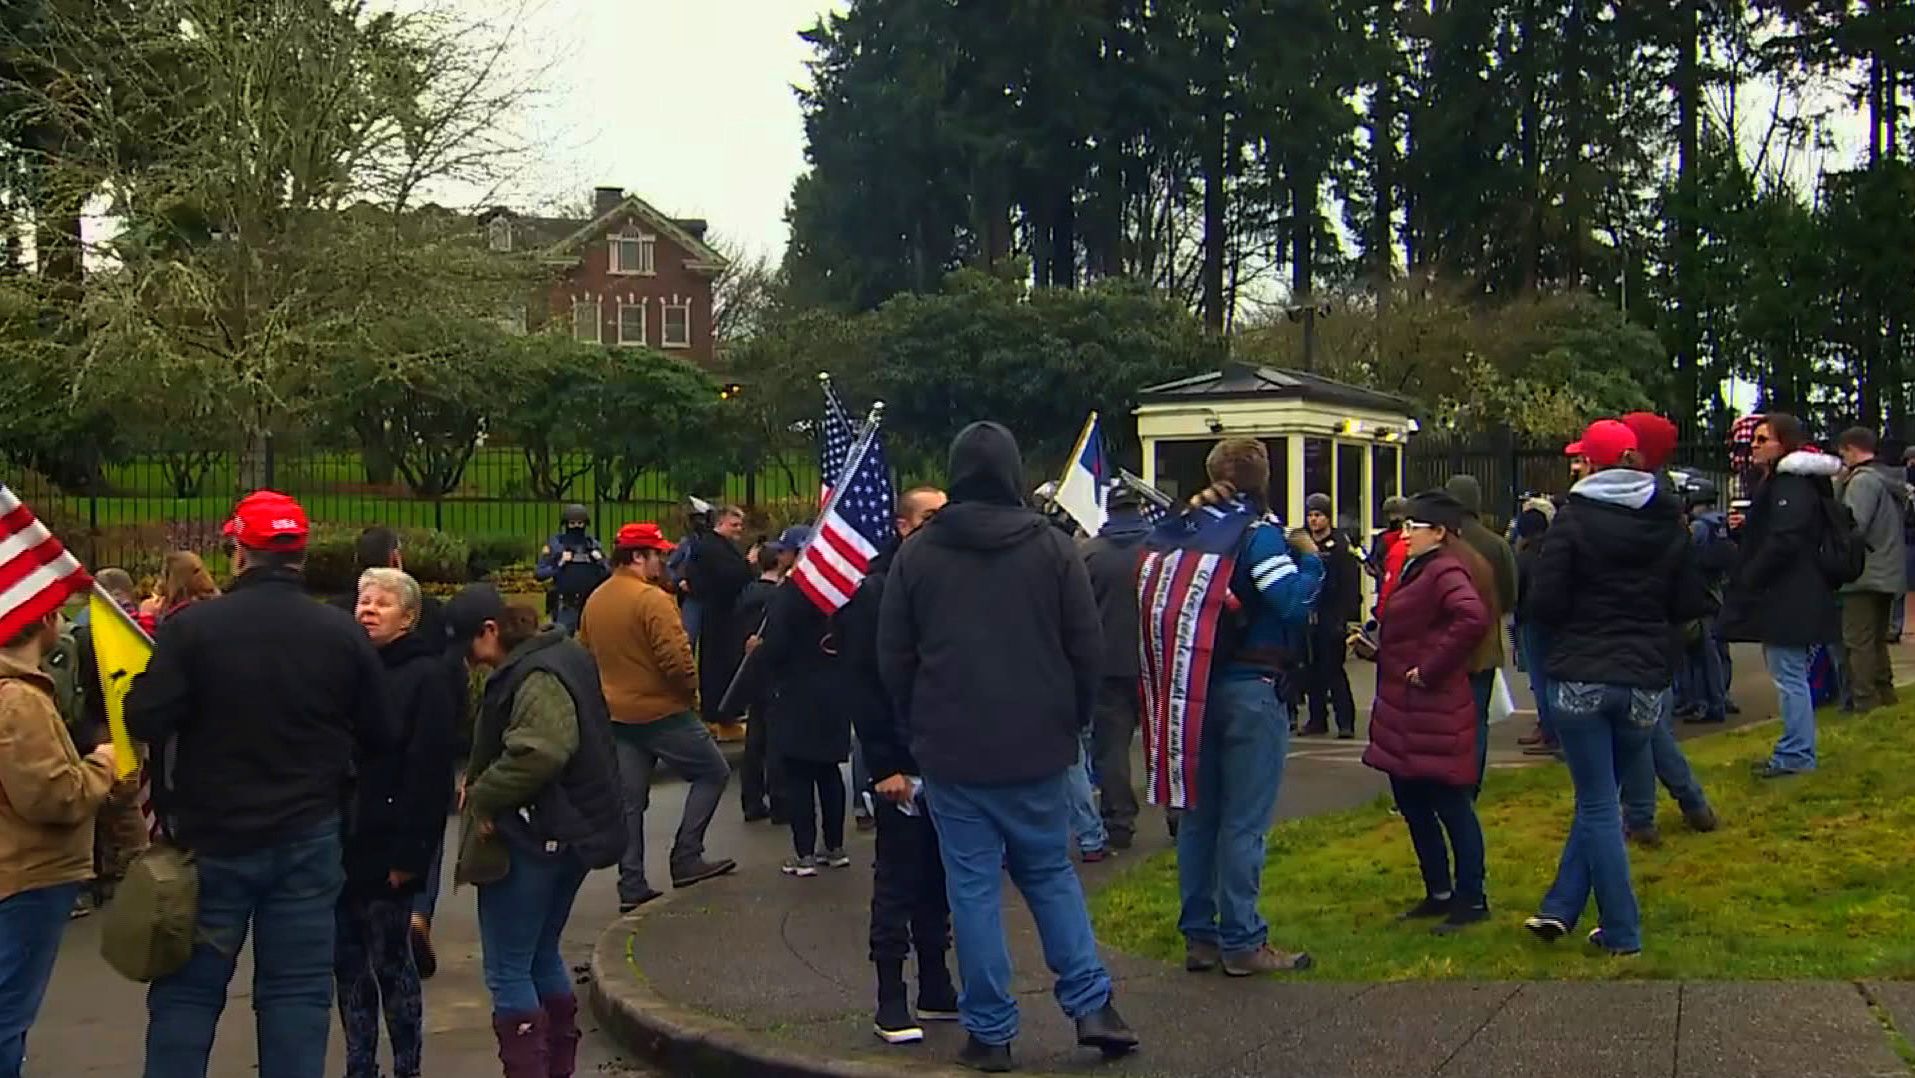 01 Trump Supporters US Demonstrations OLYMPIA